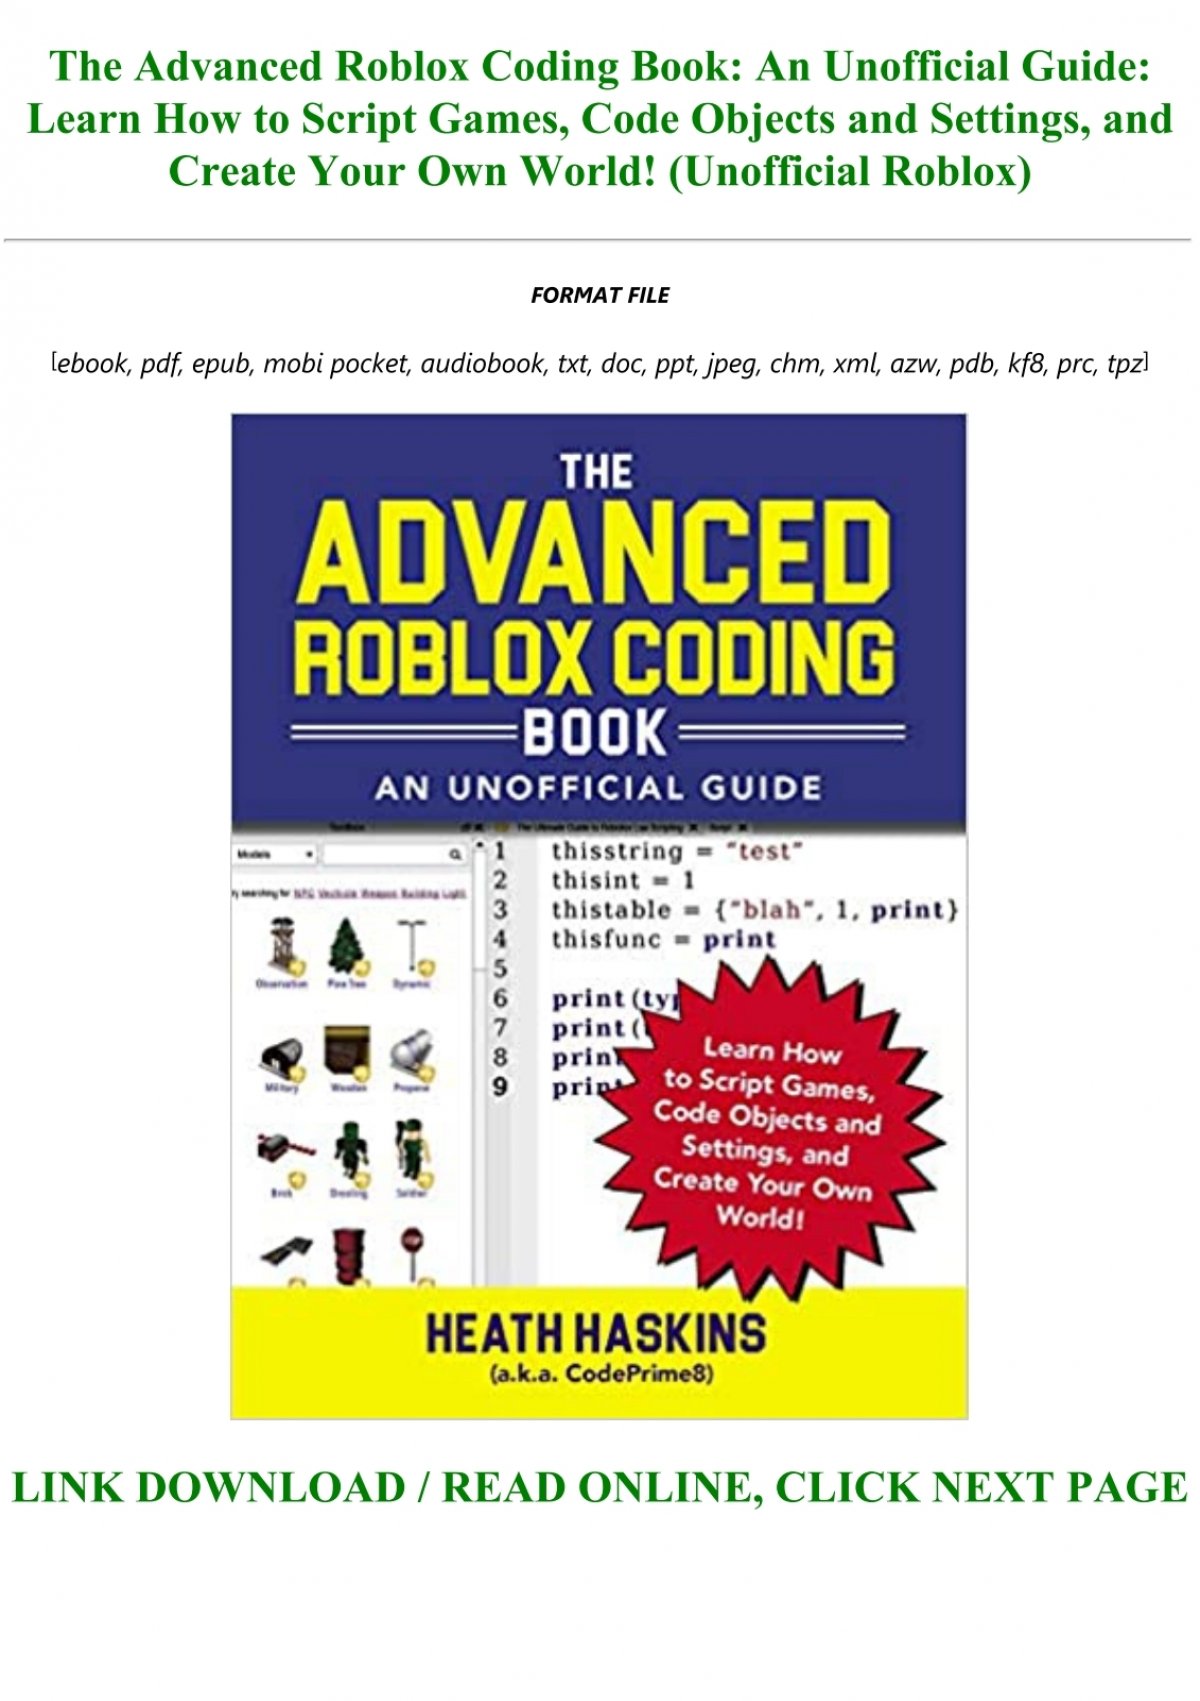 Download Pdf The Advanced Roblox Coding Book An Unofficial Guide Learn How To Script Games Code Objects And Settings And Create Your Own World Unofficial Roblox Pre Order - roblox prime gaming codes